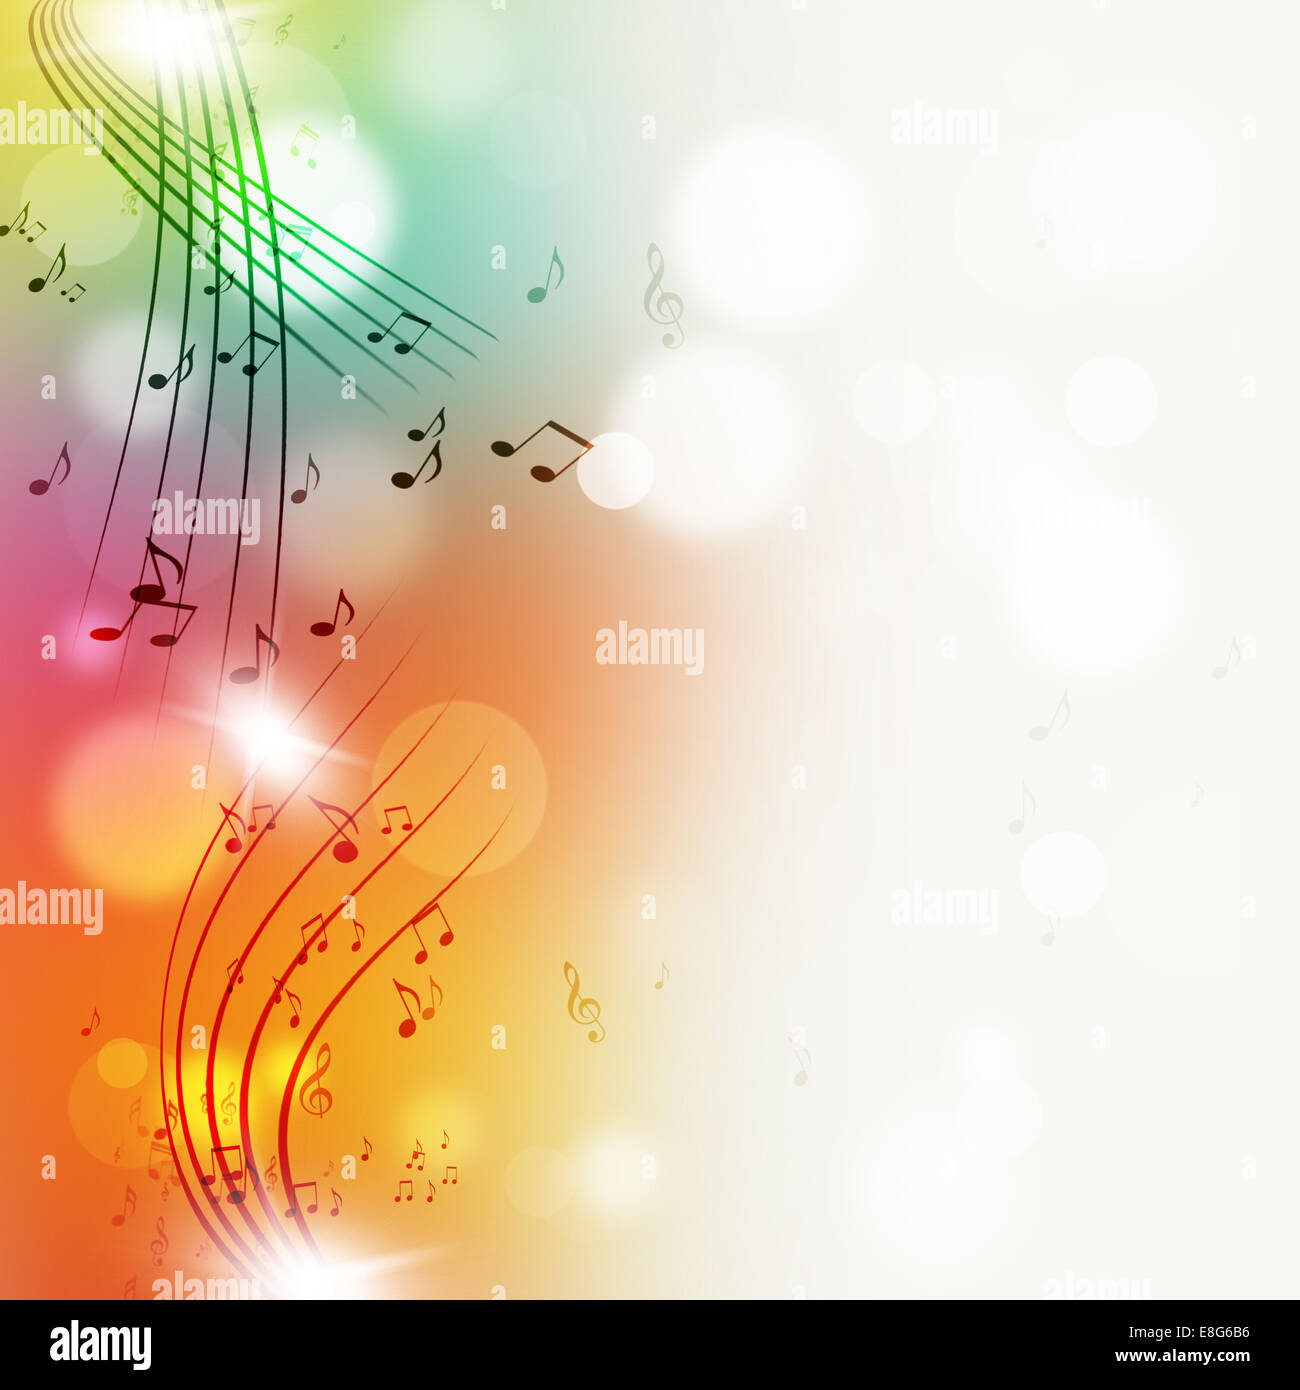 abtract music notes multicolor bright background for joyful events Stock Photo